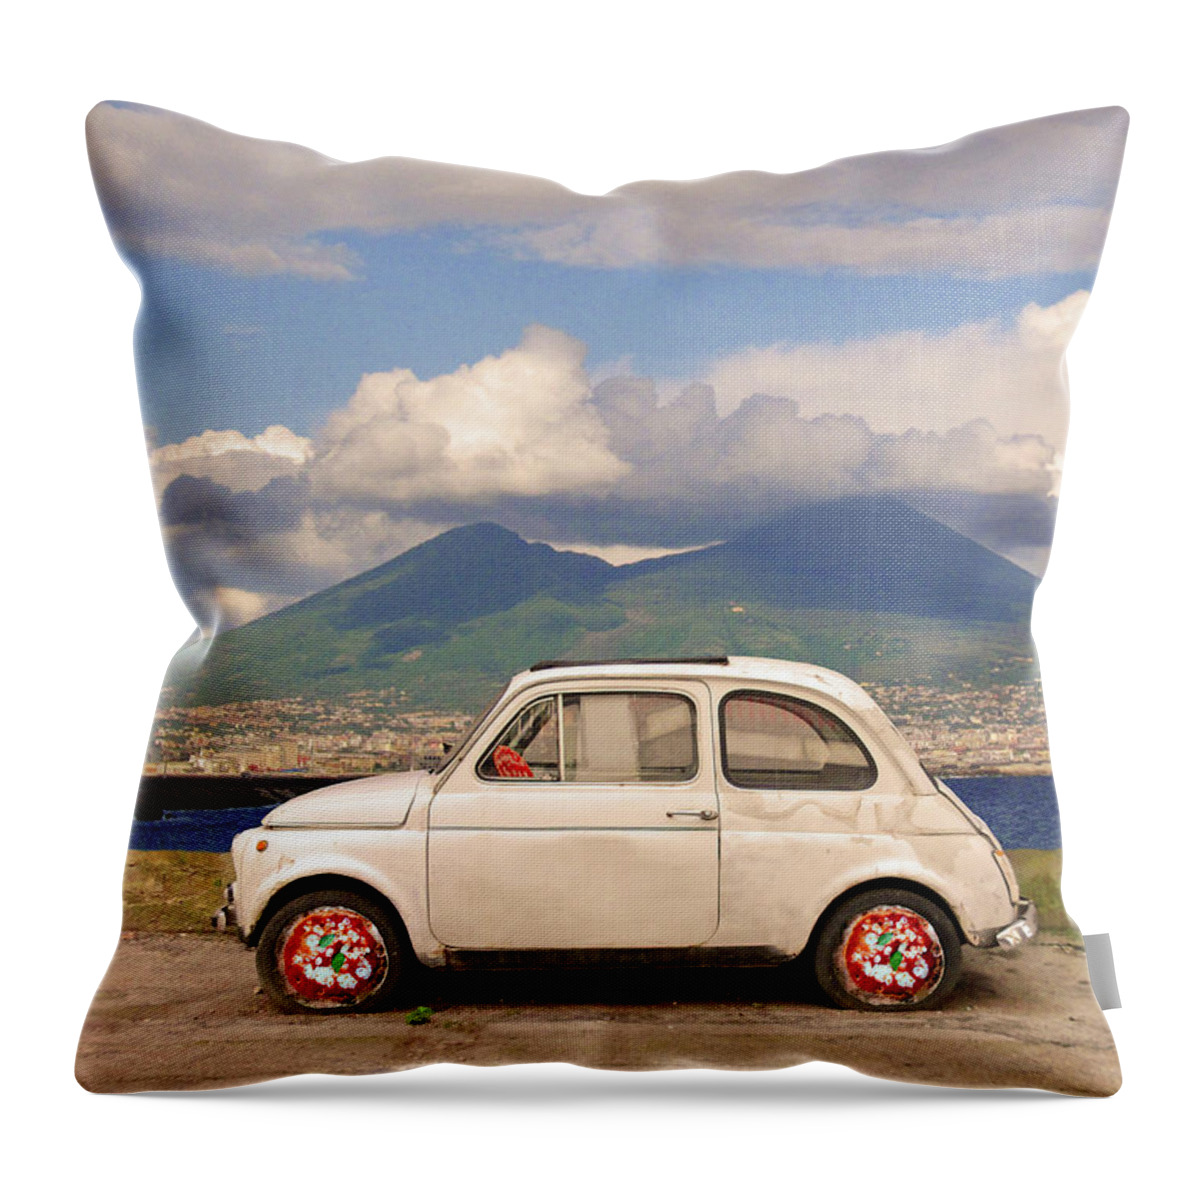 Fiat 500 Throw Pillow featuring the digital art Fiat 500 Pizza by Dario ASSISI